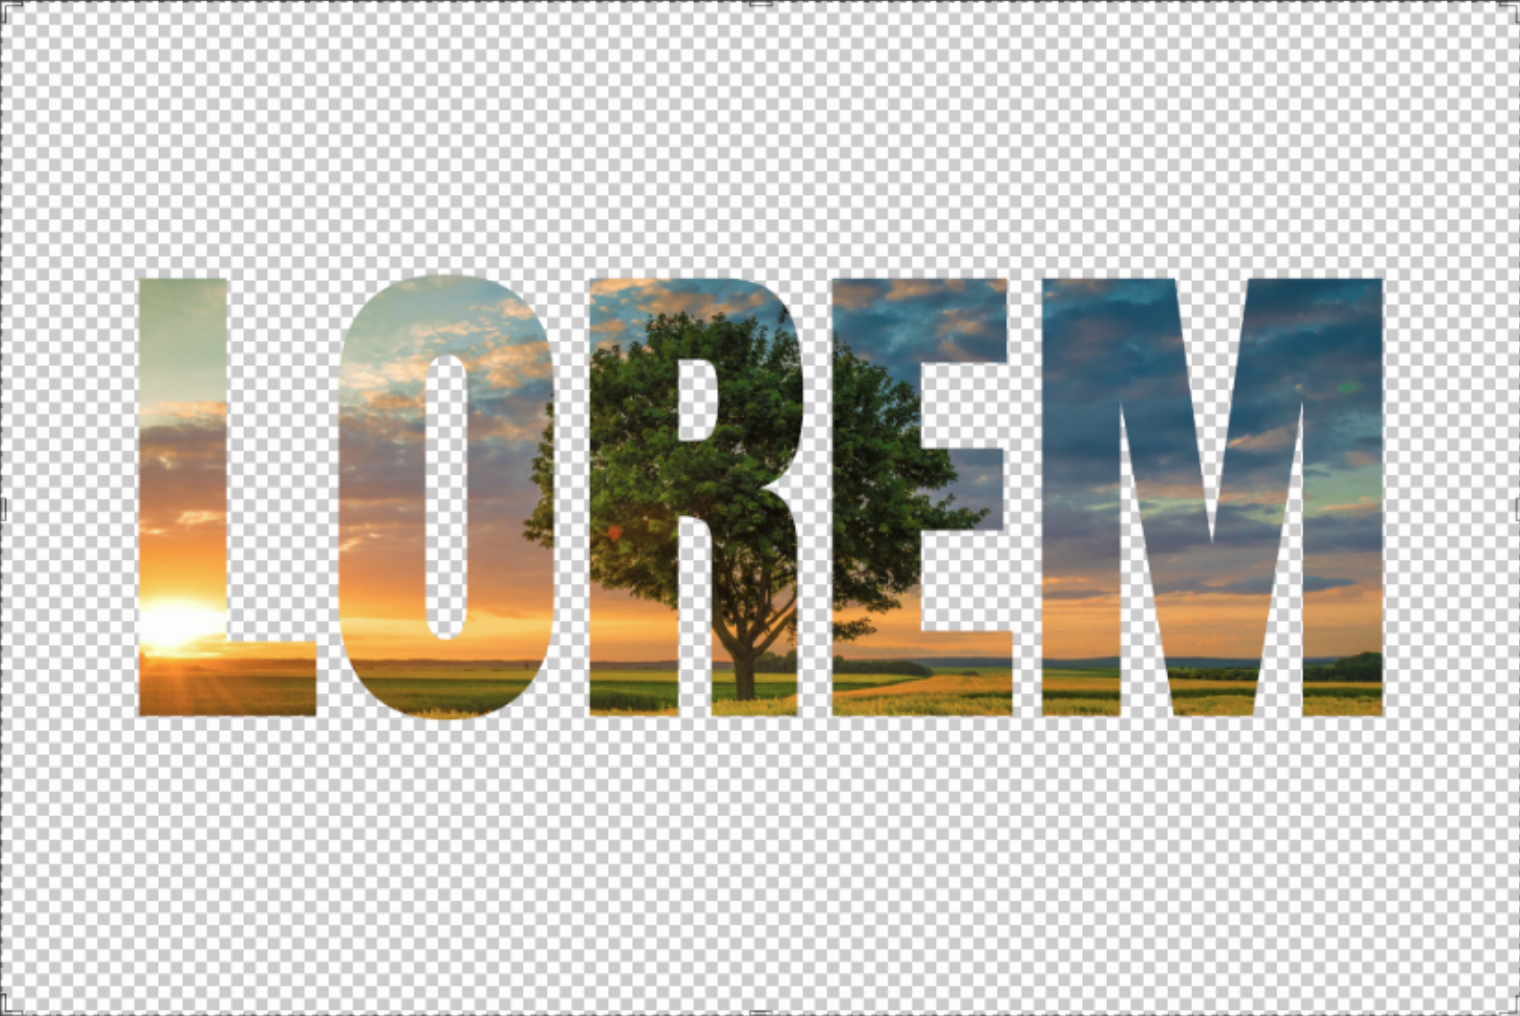 How to Fill Text With an Image in Photoshop? Put an Image in Text